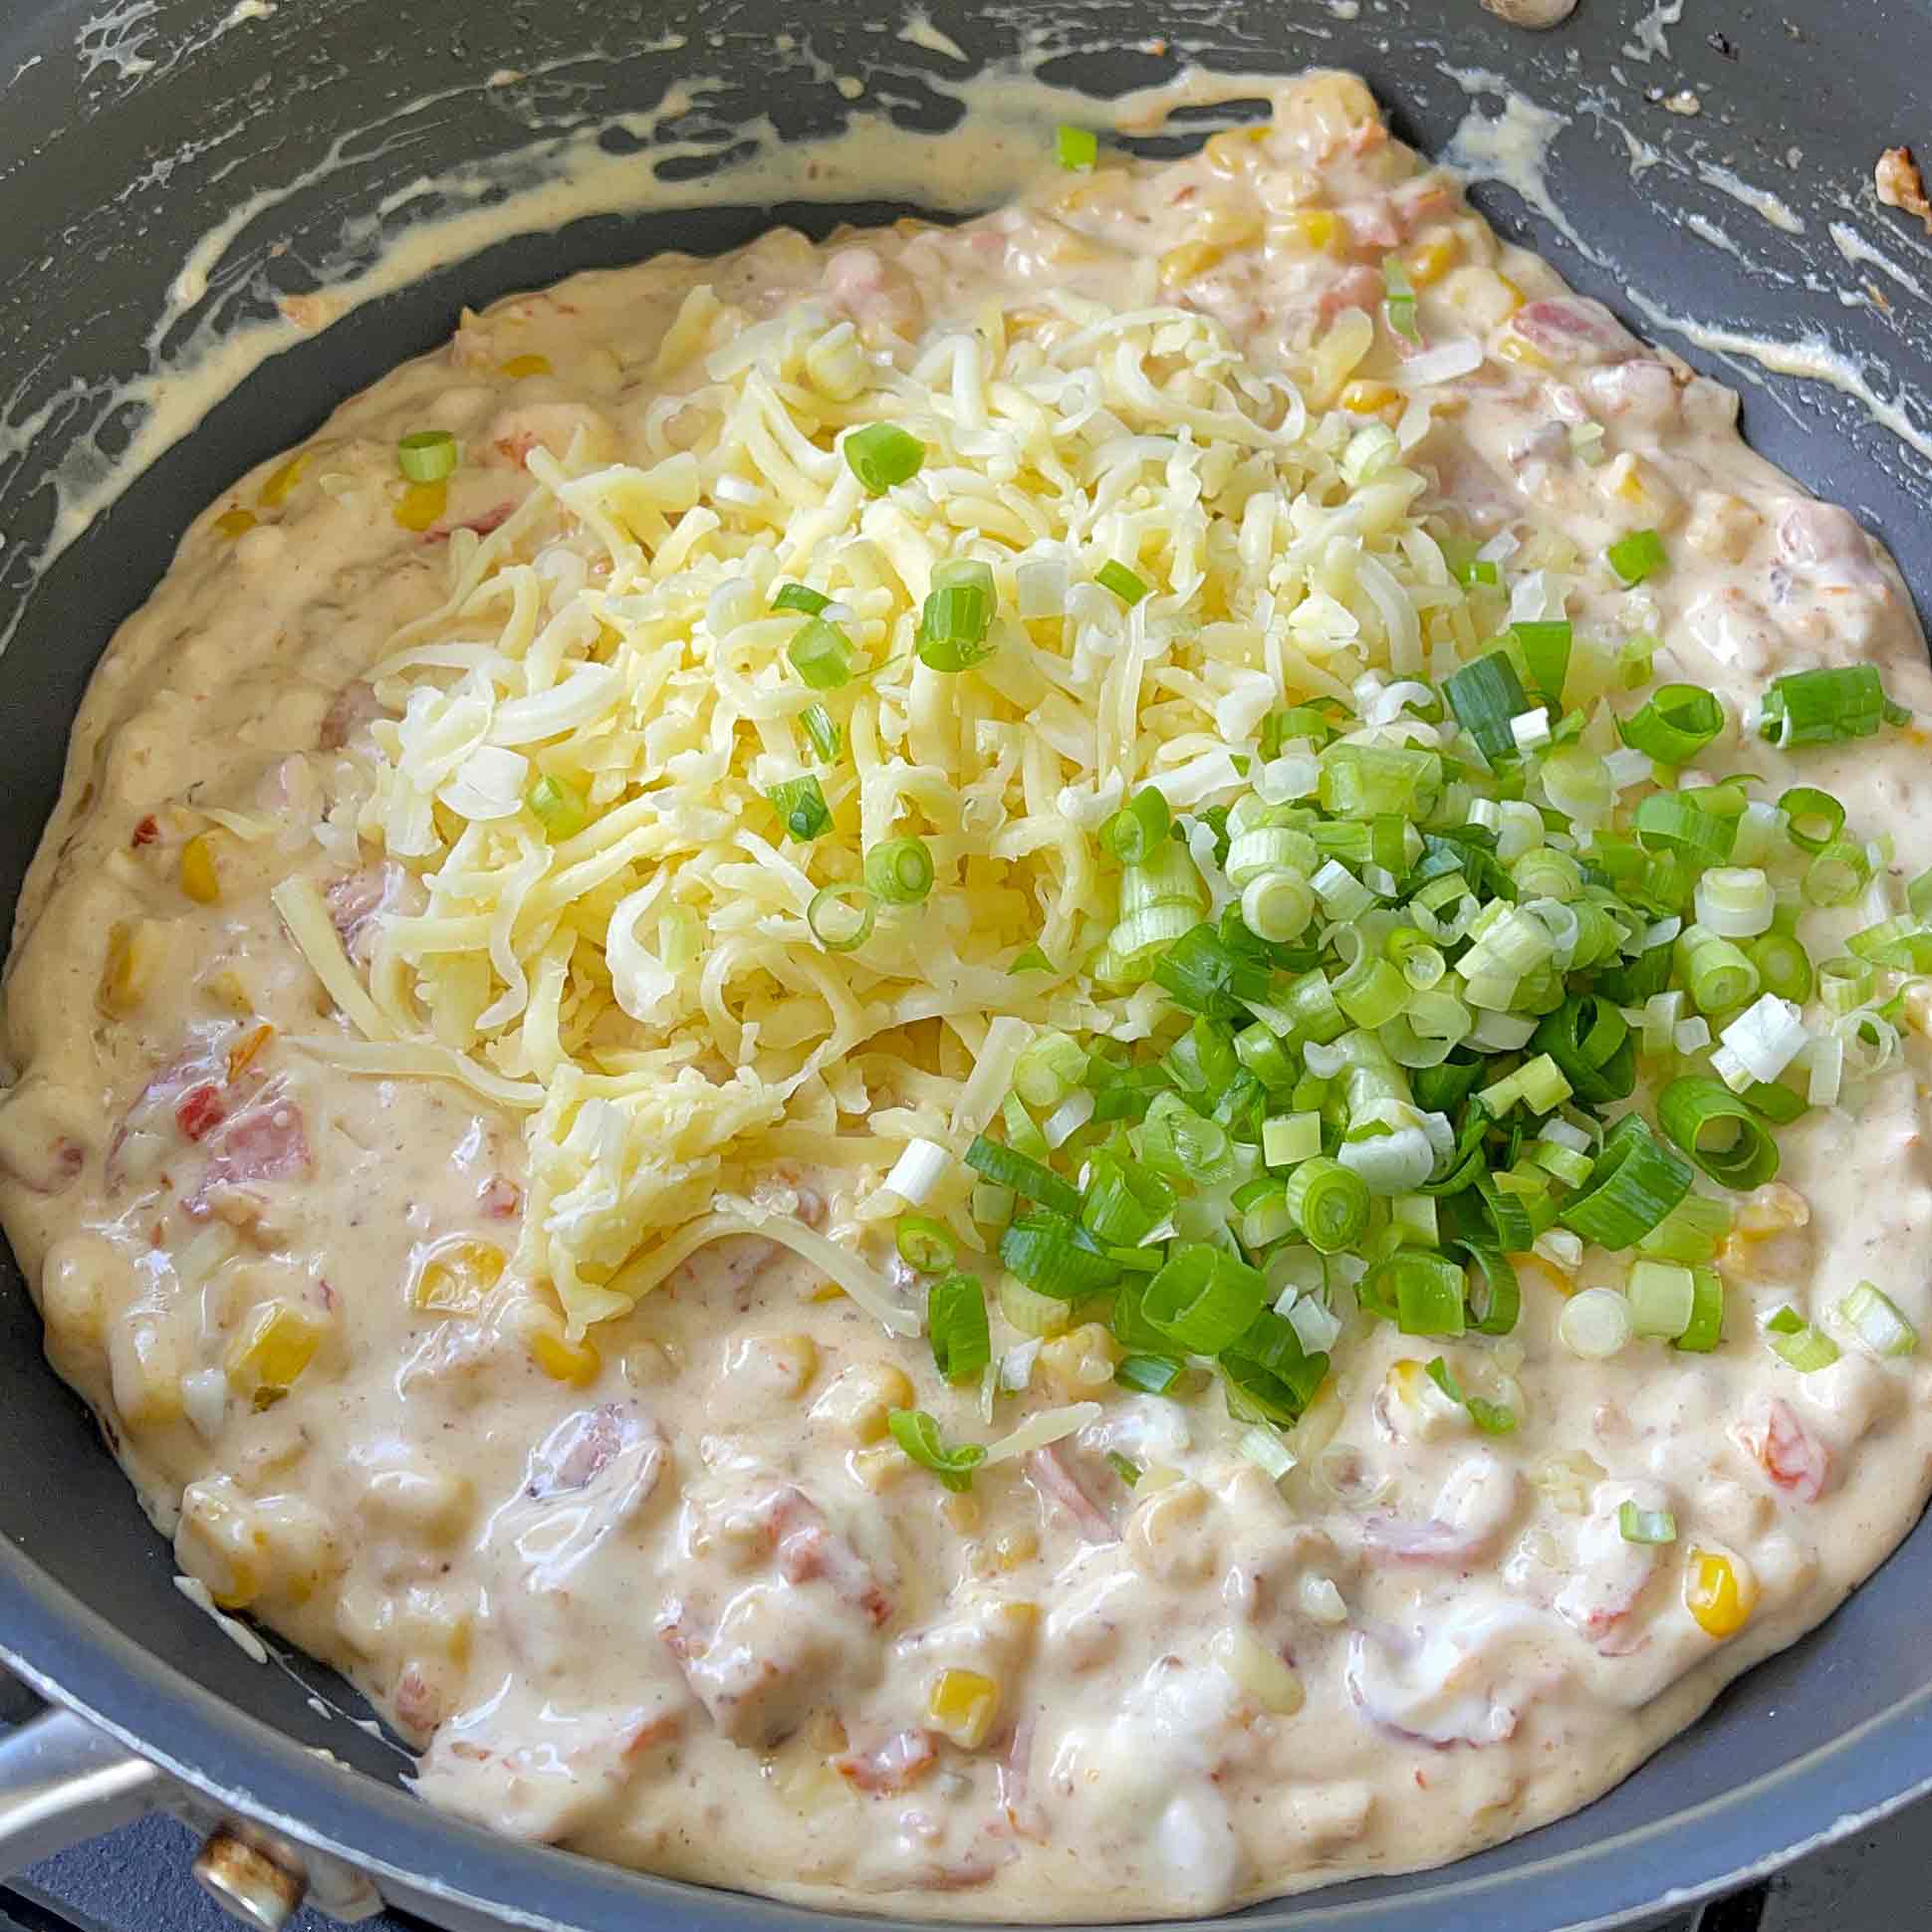 Creamy bacon and corn dip in a frying pan with mozzarella and spring onion added.